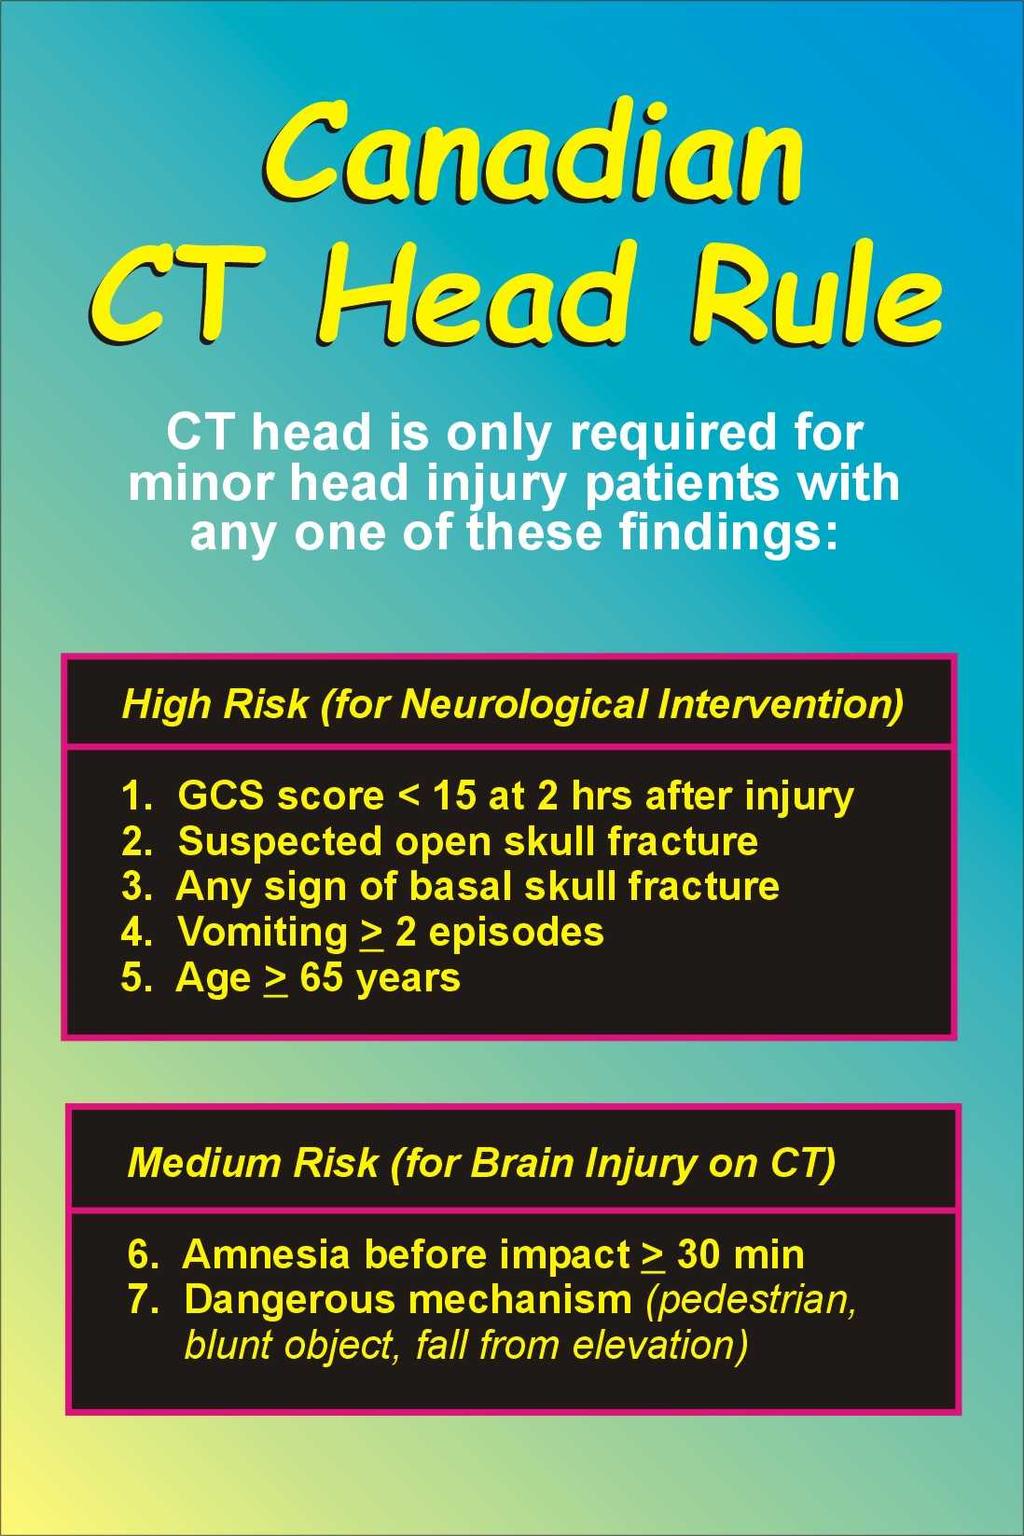 High Risk (for Neurological Intervention) 1. GCS score < 15 at 2 hrs after injury 2. Suspected open skull fracture 3. Any sign of basal skull fracture 4.